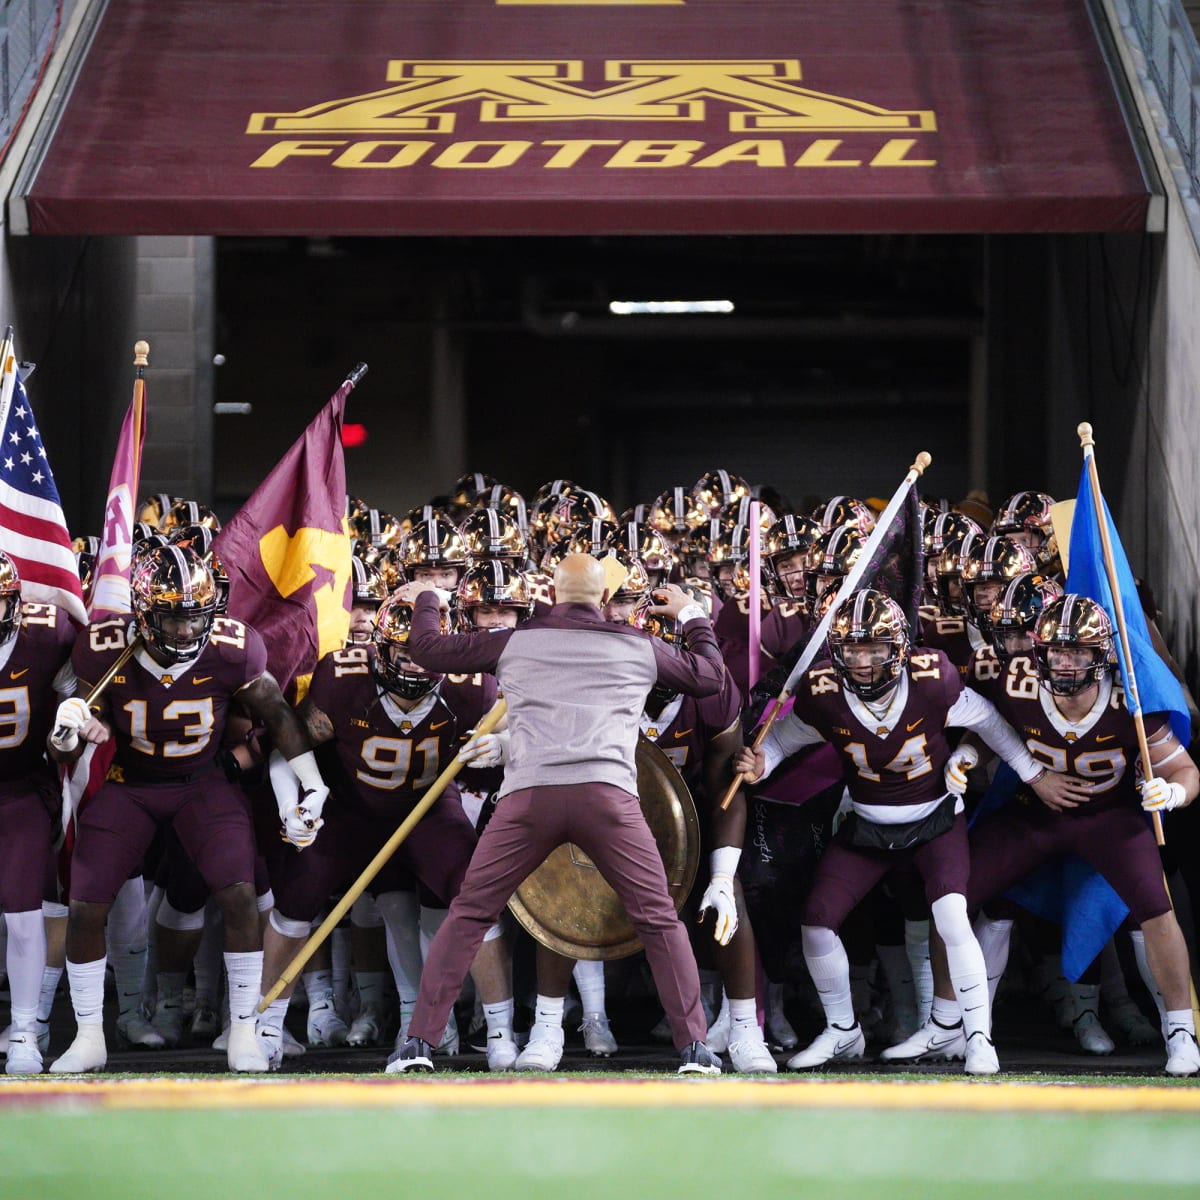 You need PAC-12 Network to watch the Gopher football game Saturday